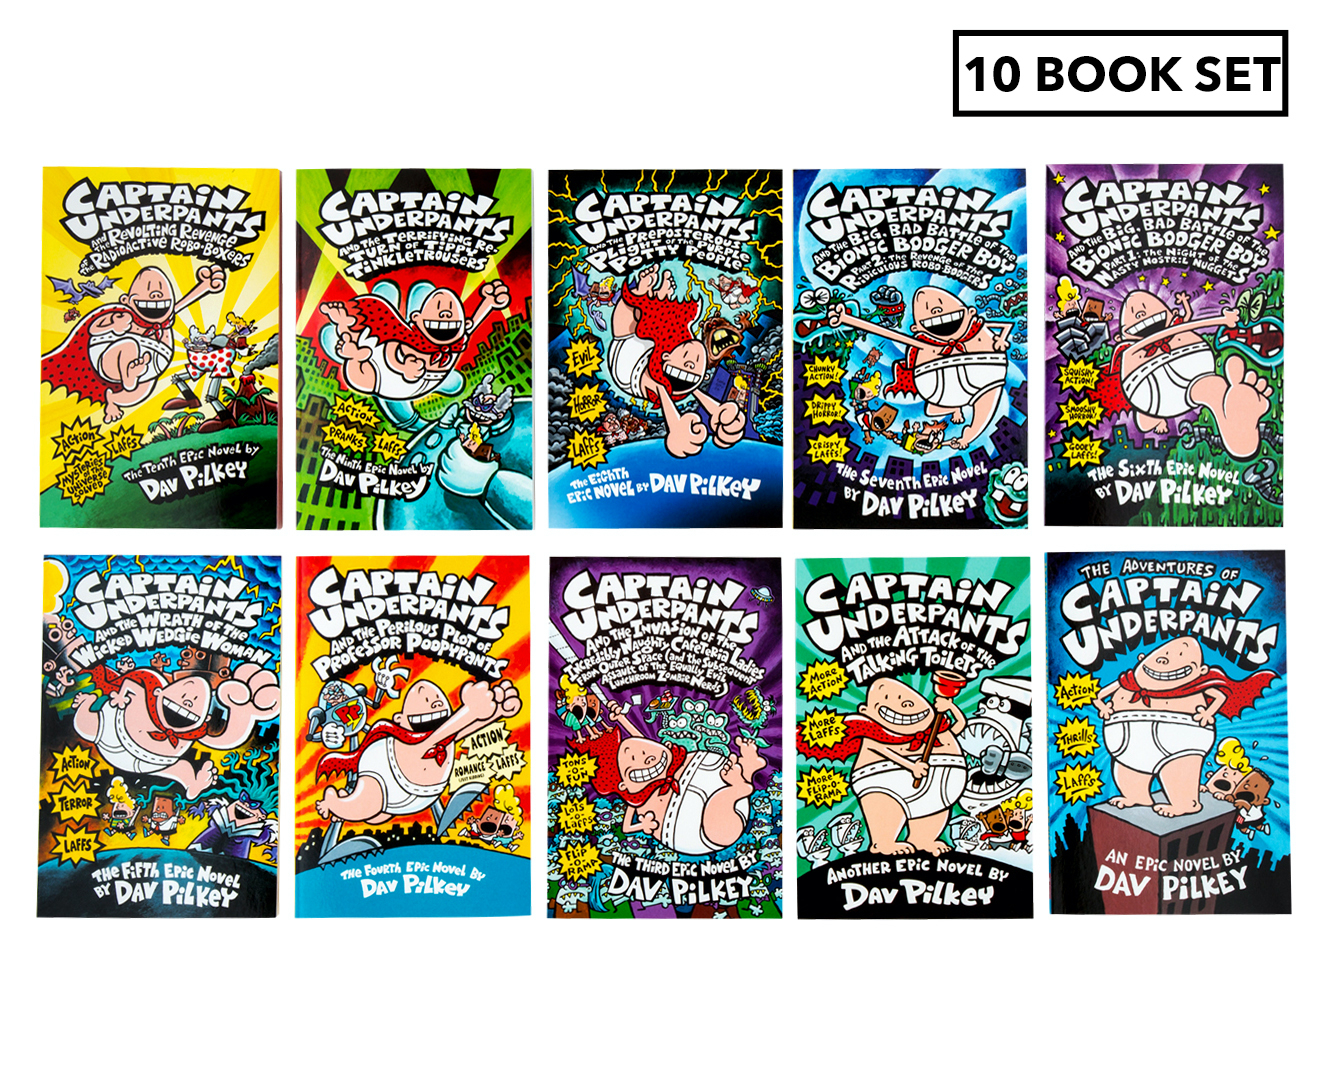 Captain Underpants 10Book Collection Www.catch.co.nz, www.catch.co.nz